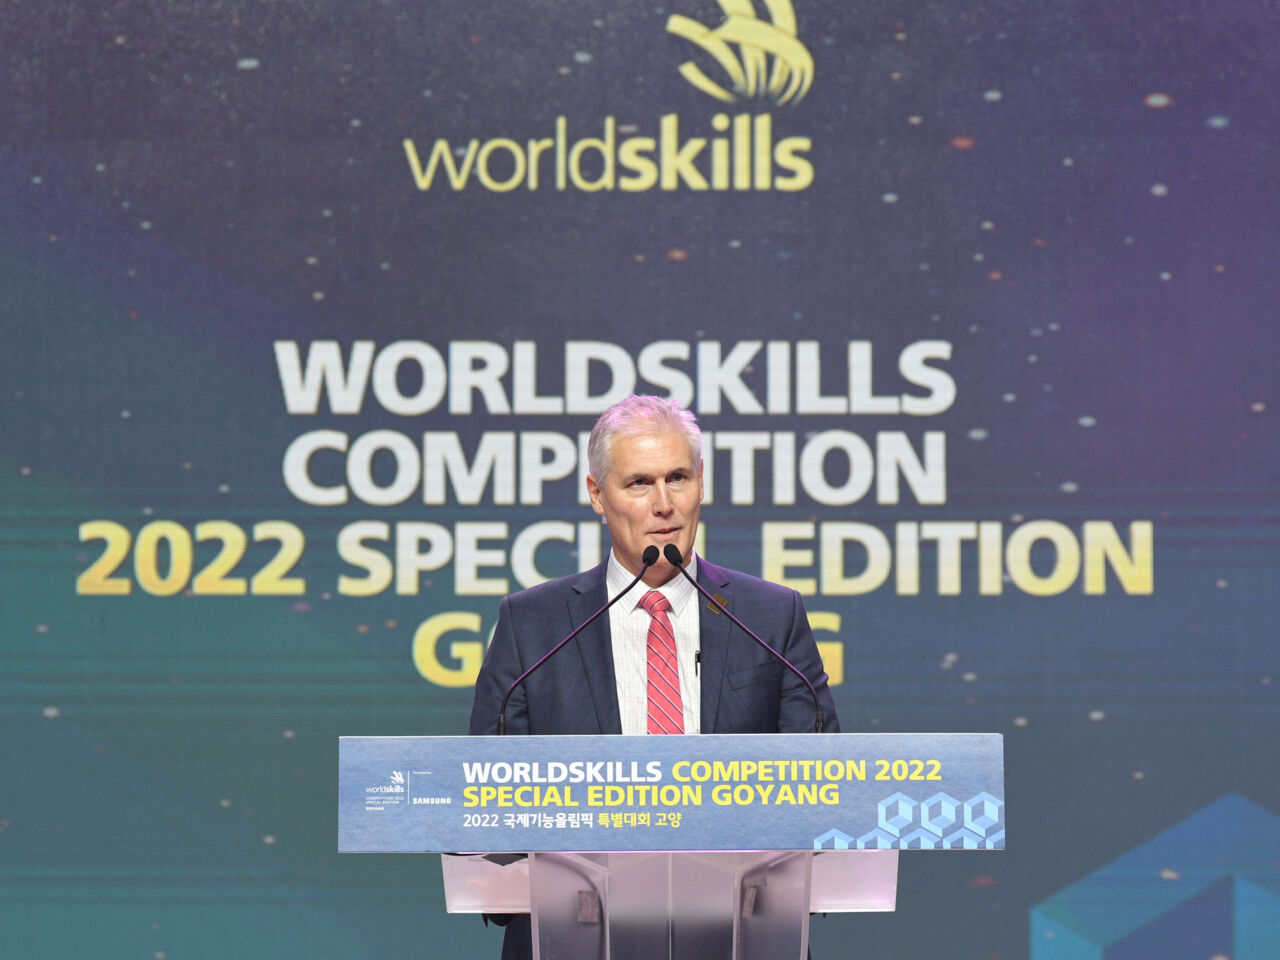 WorldSkills International CEO David Hoey addressing the Opening Ceremony of WorldSkills Competition 2022 Special Edition at the Kintex Exhibition Hall in Goyang, Korea.
